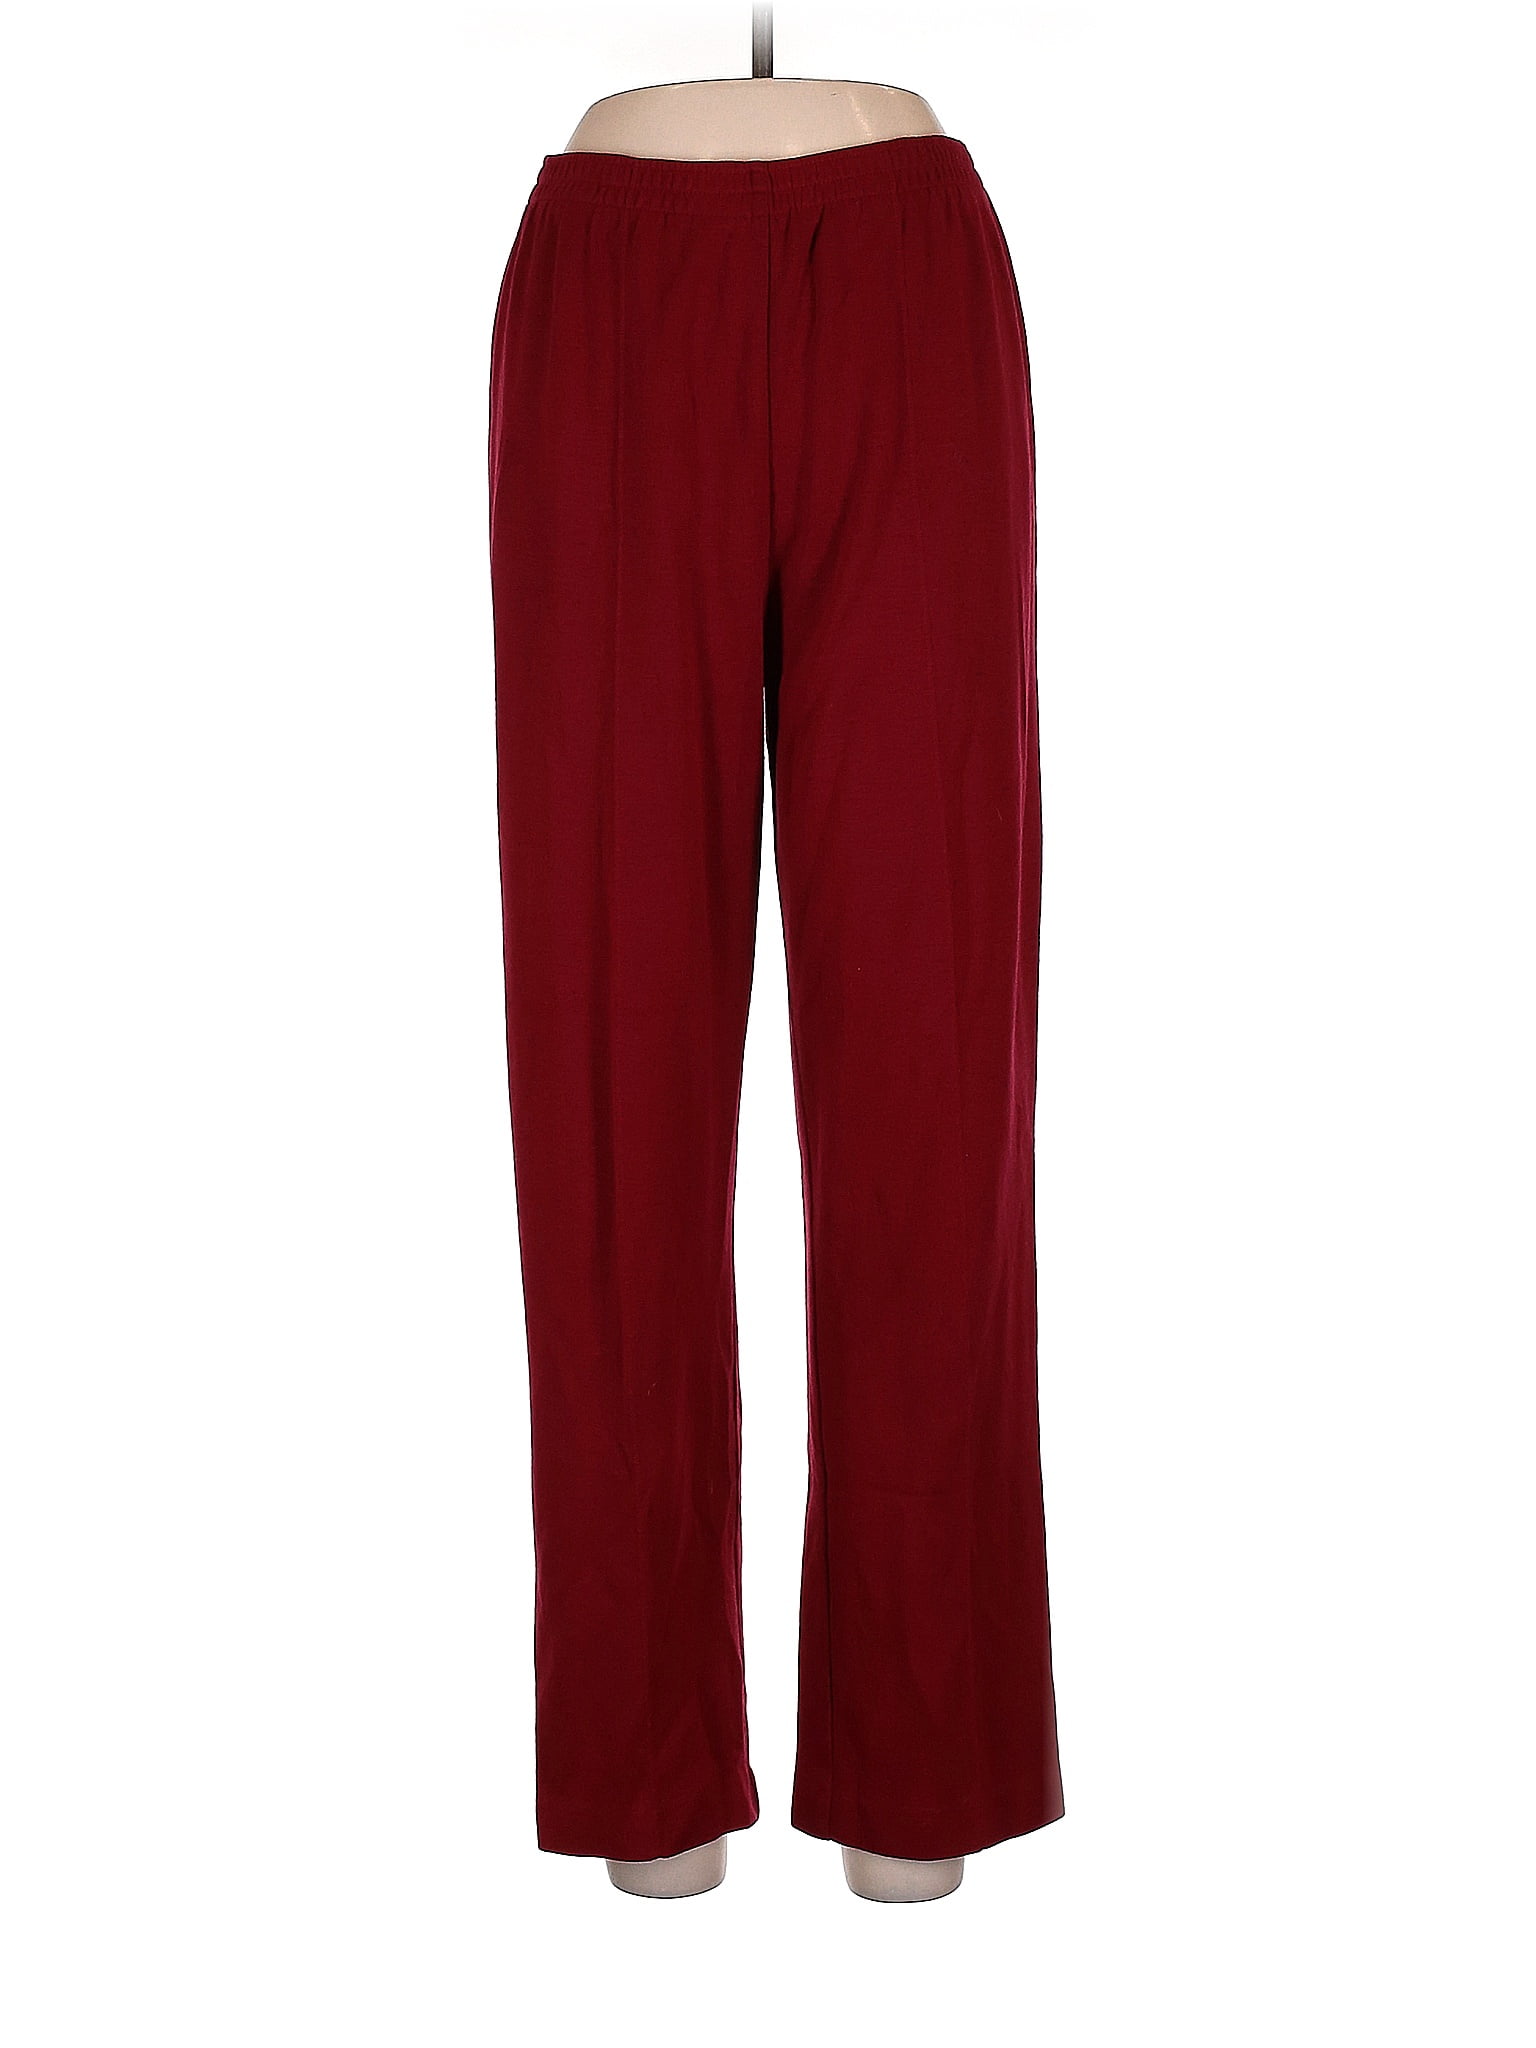 Cathy Daniels Solid Maroon Red Casual Pants Size M - 52% off | thredUP